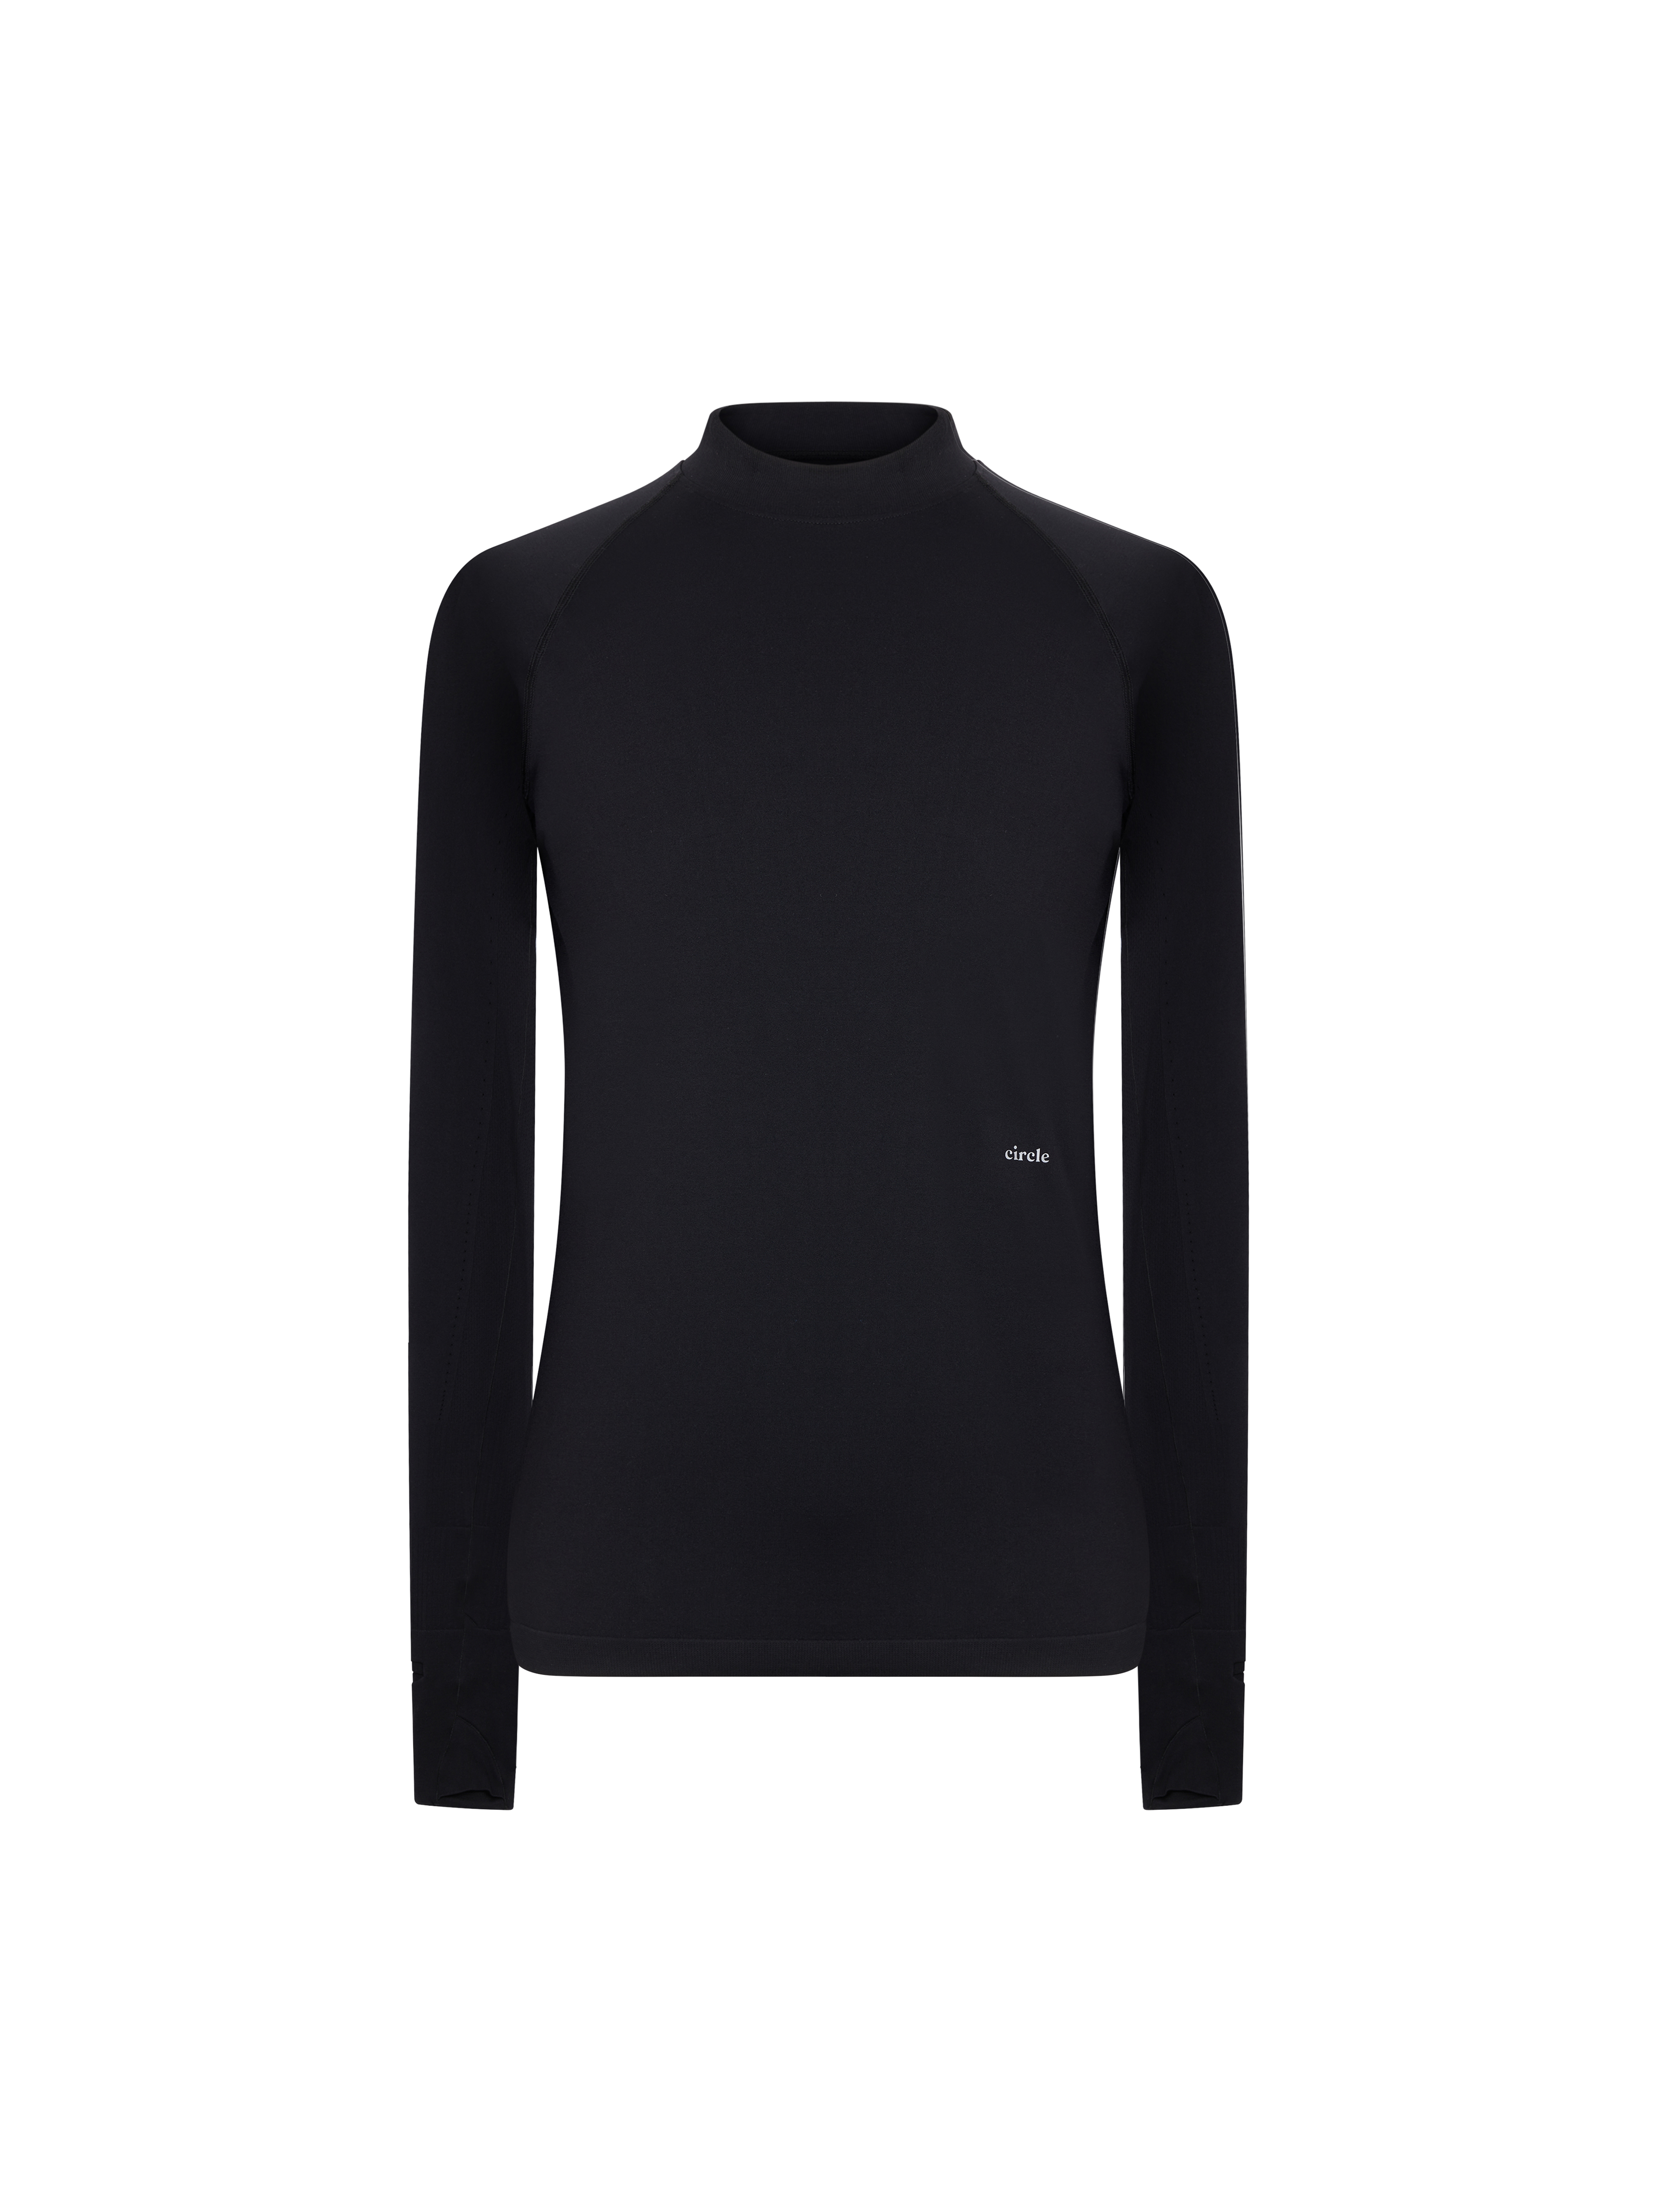 Baselayer, a real second skin feeling. Think to provide maximum comfort and freedom of movement. Thermal insulation for runs in cold weather and all weather conditions.	